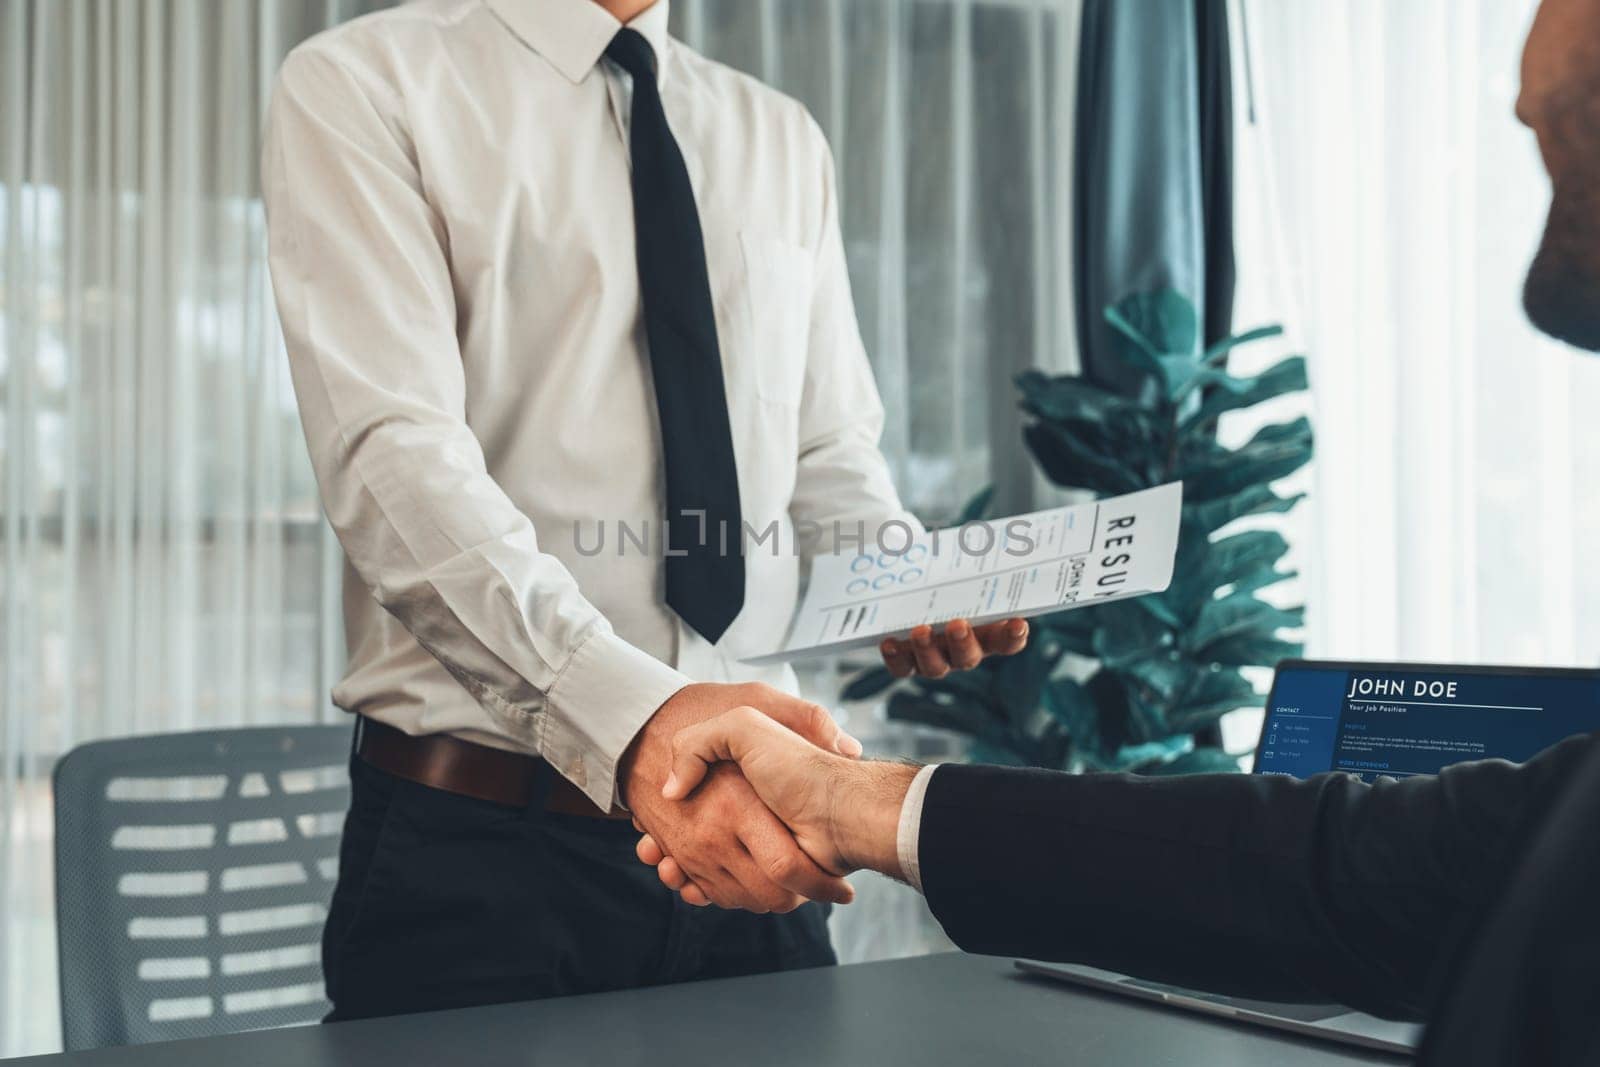 Successful job interview at business office with handshake. Positive discussion of qualifications and application for position. Job hiring concept between candidate and interviewer. Fervent